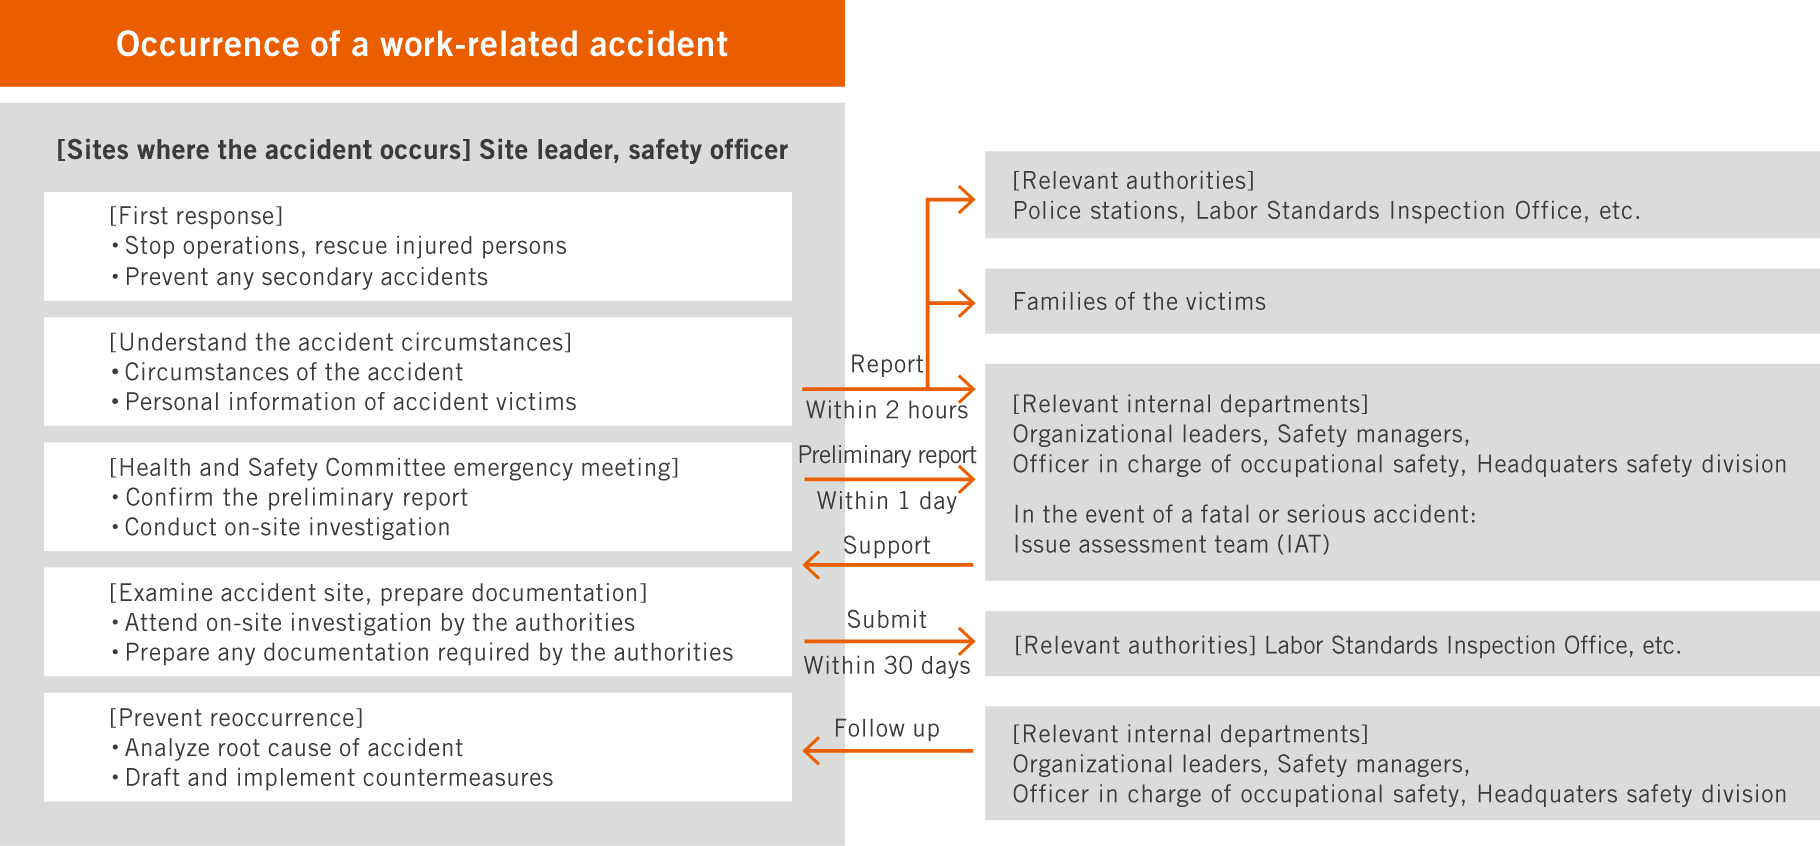 Steps in the event of a work-related accident